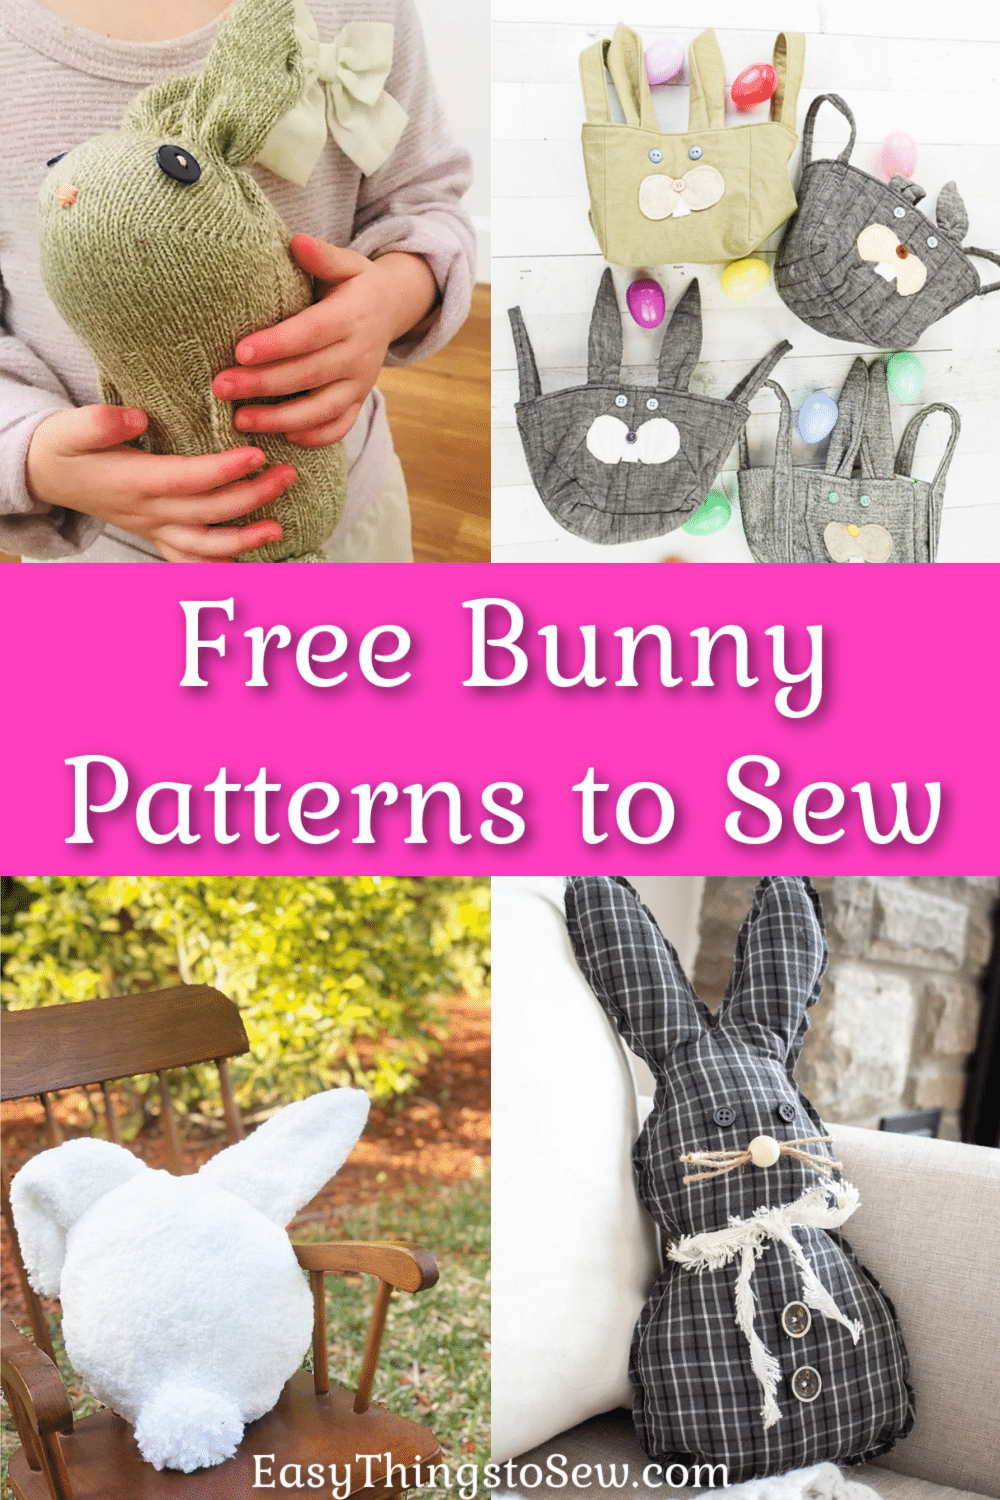 Discover free bunny sewing patterns to create adorable stuffed animals.